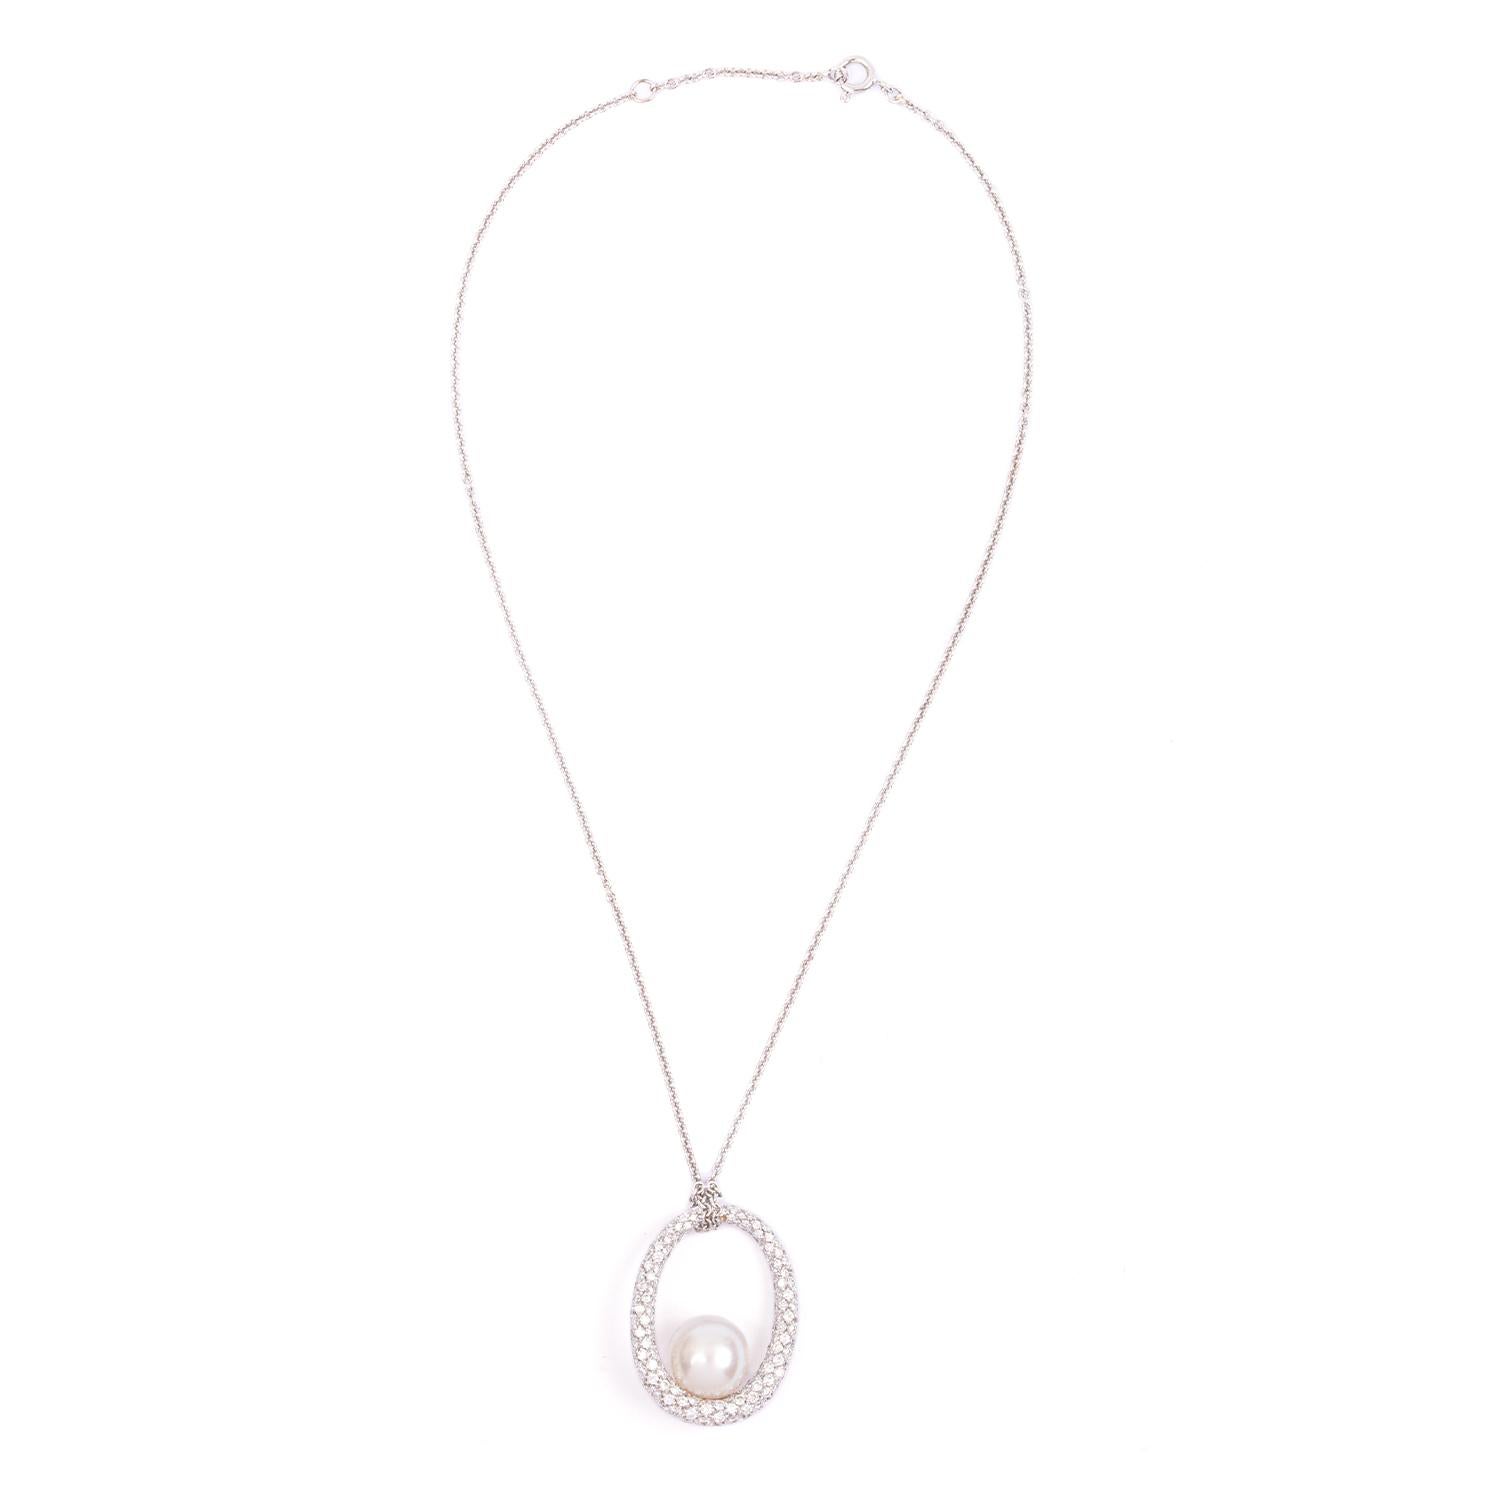 A very elegant  Compagnia delle Perle white gold necklace with Japanese pearl and Diamonds, pearl diameter 11/12 and 1,14 carats of White Diamonds.
chain length 40 cm, pendant width 2.5 cm length 3.3

 16 gr


